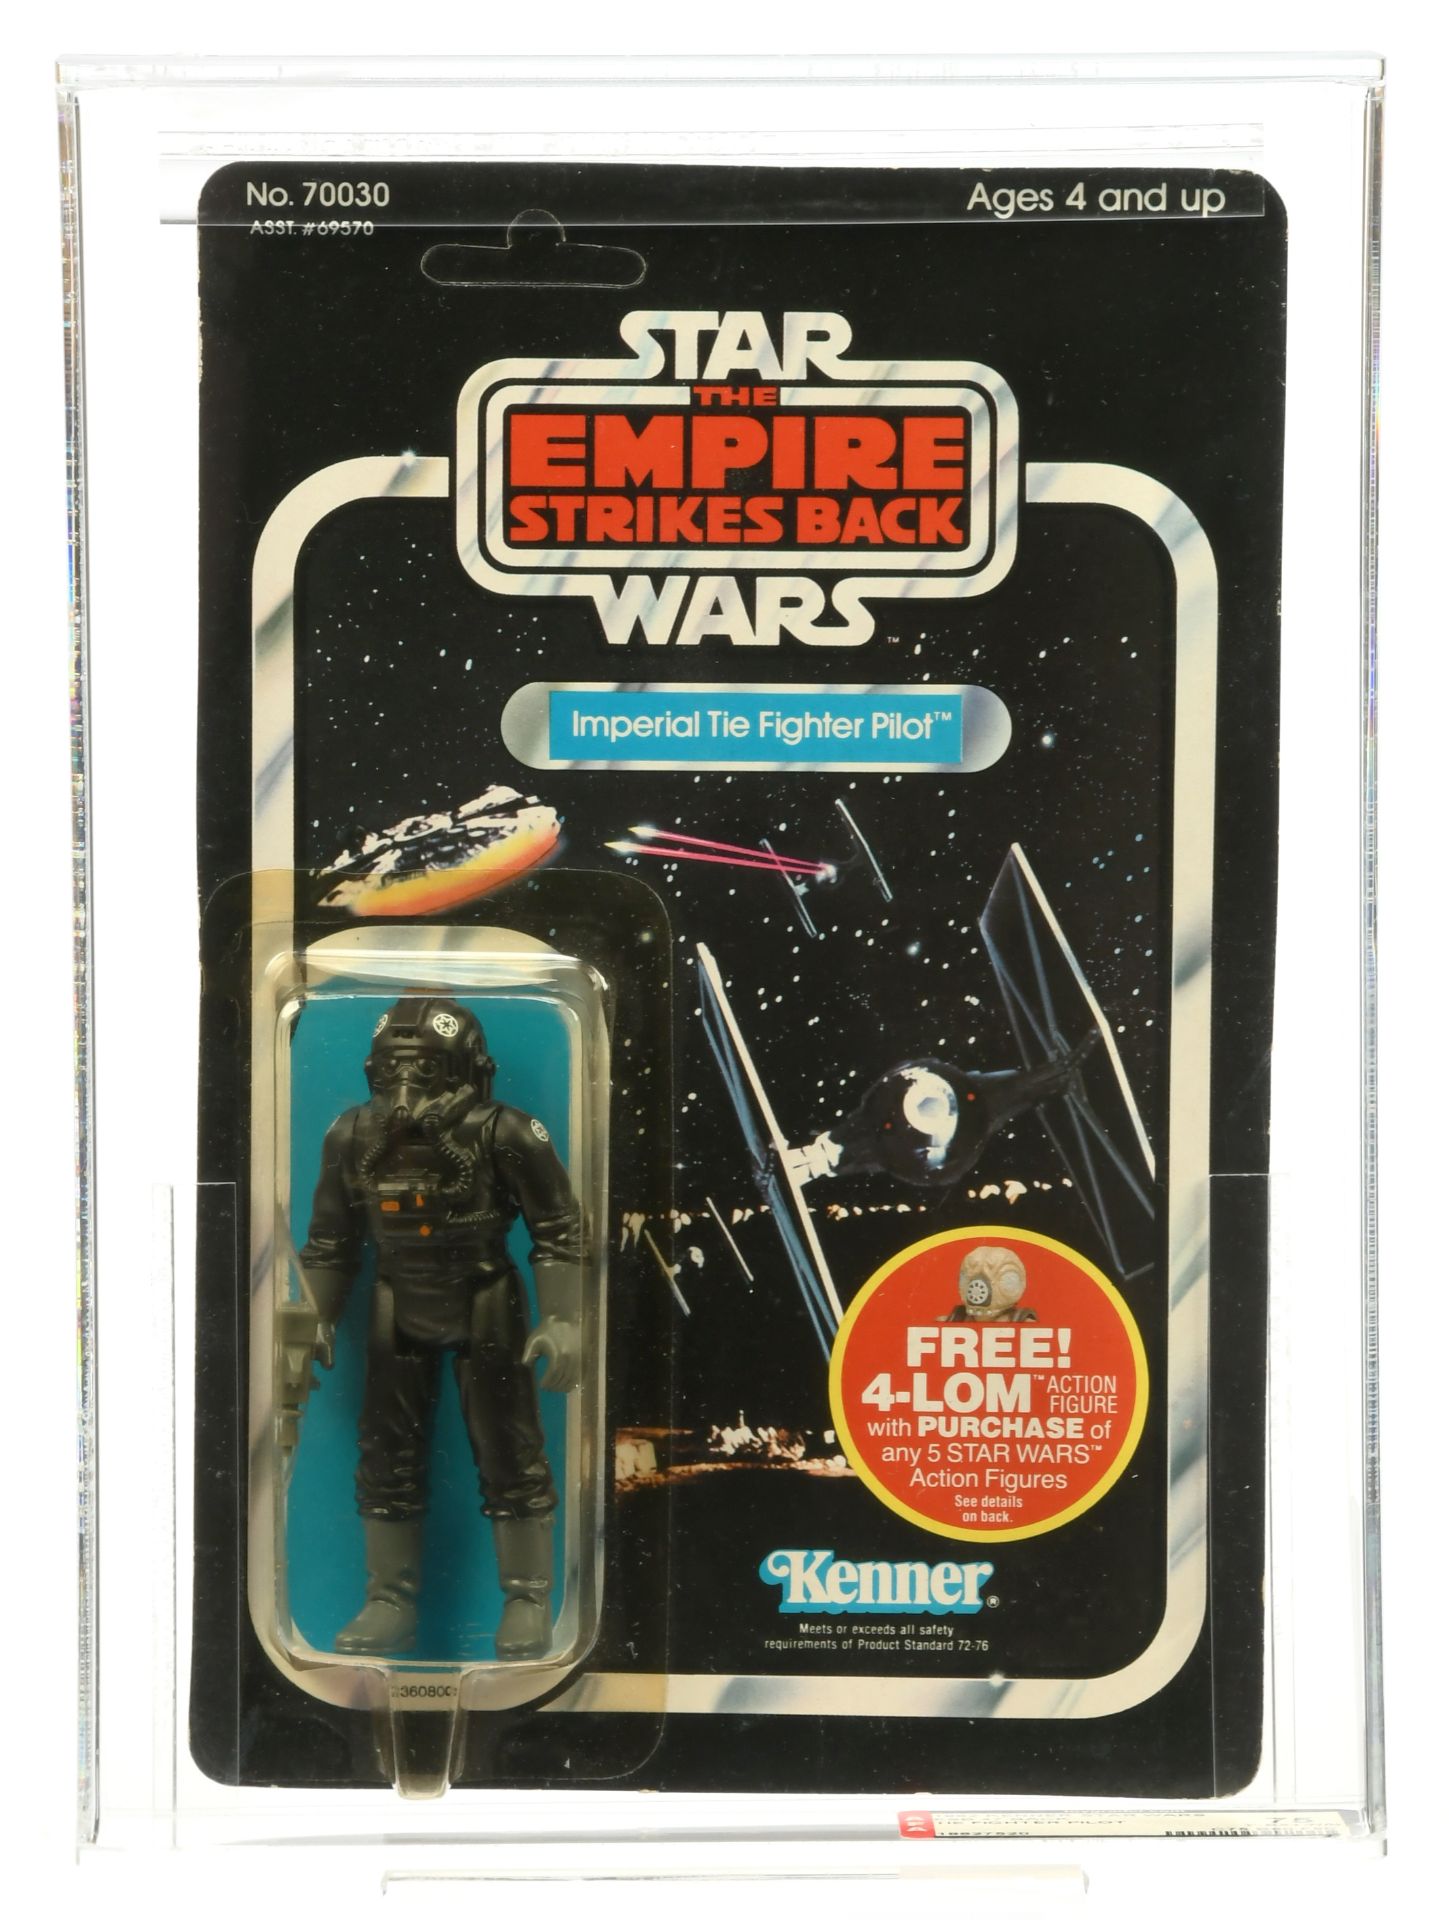 Kenner Star Wars The Empire Strikes Back Imperial TIE Fighter Pilot 3 3/4" Vintage Graded Figure